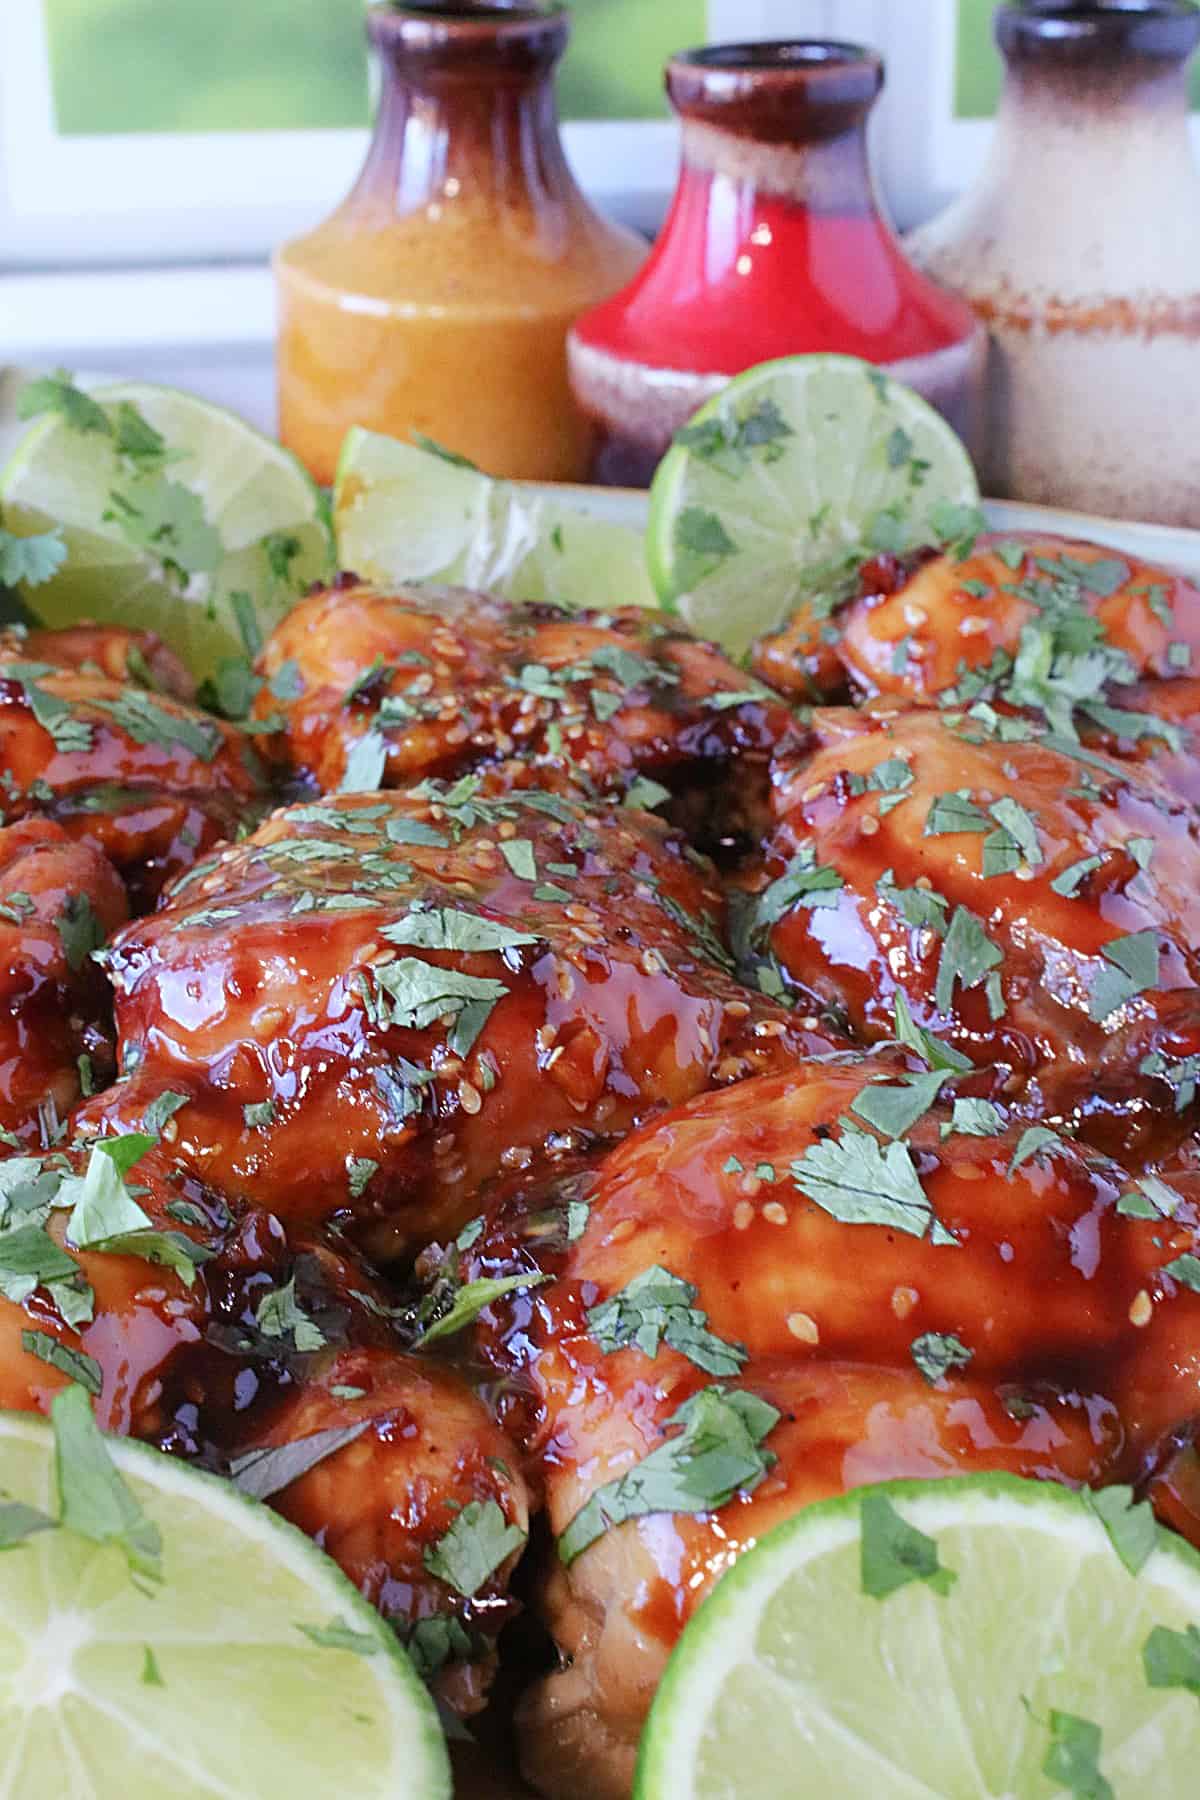 Deeply colored Teriyaki Glazed Chicken Thighs with limes and cilantro.